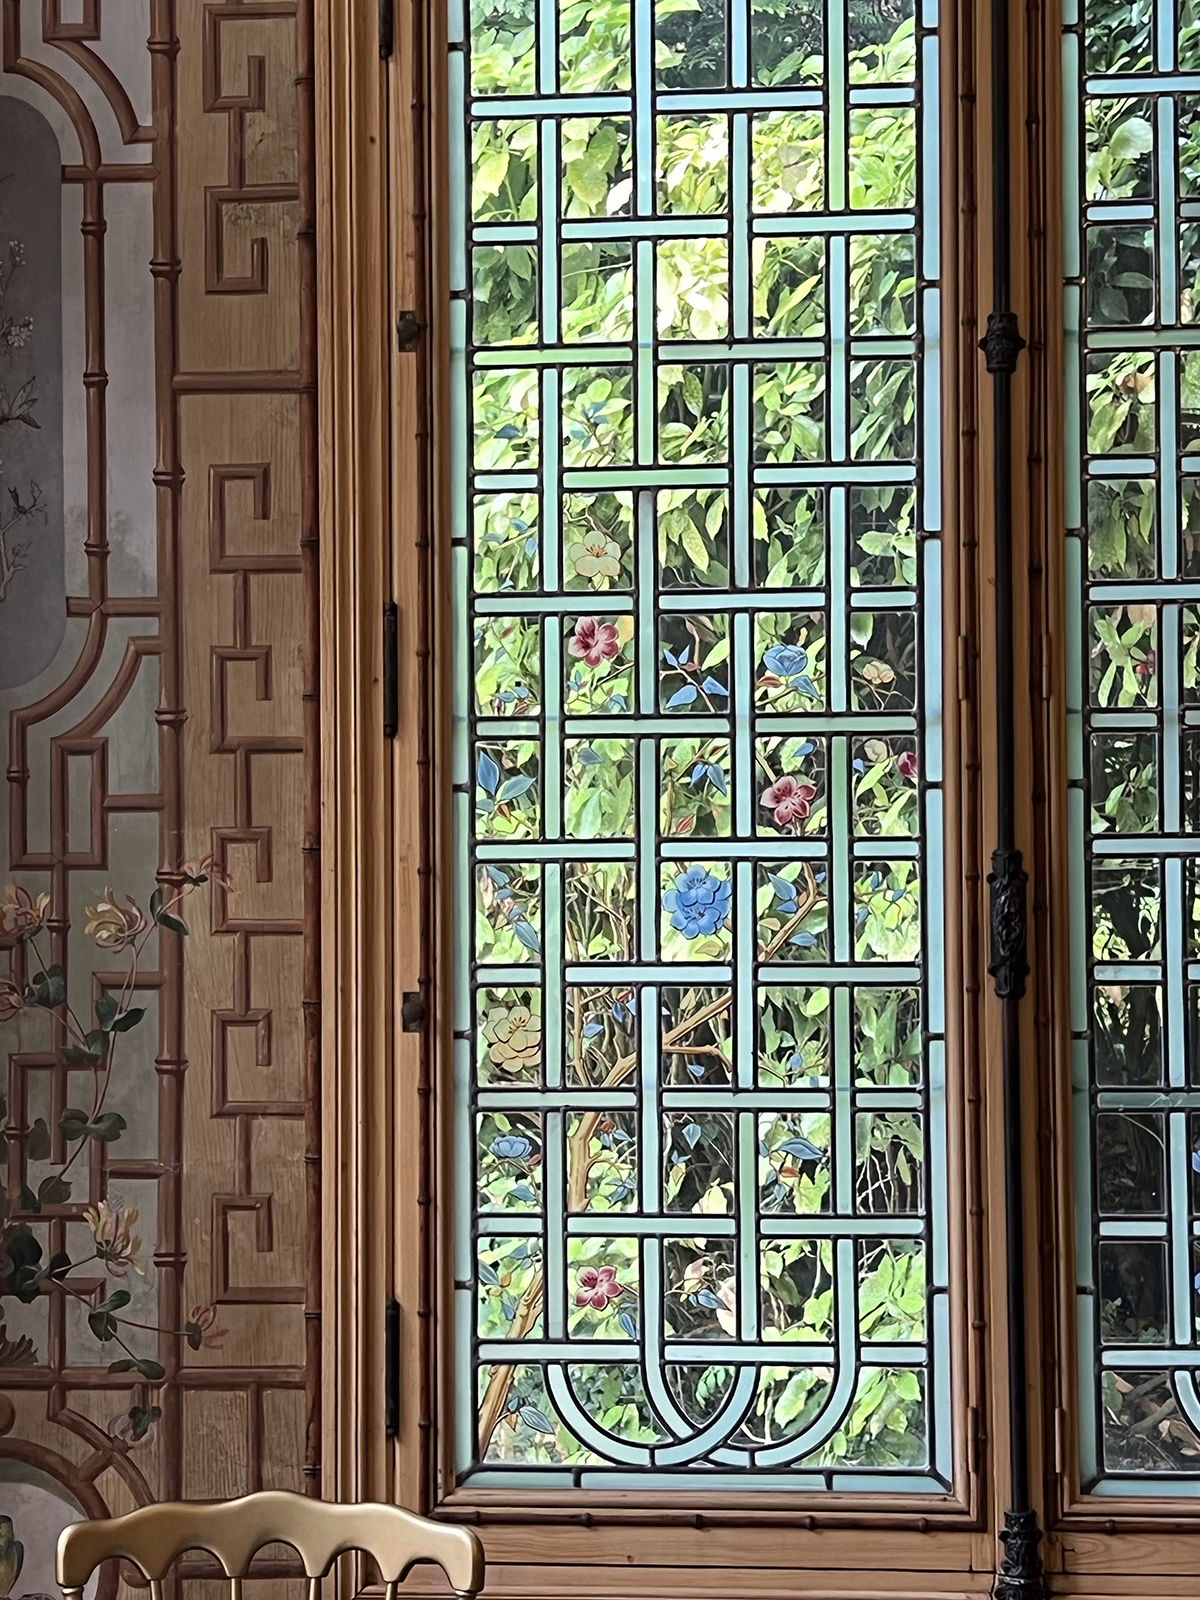 A window with flowers behind it